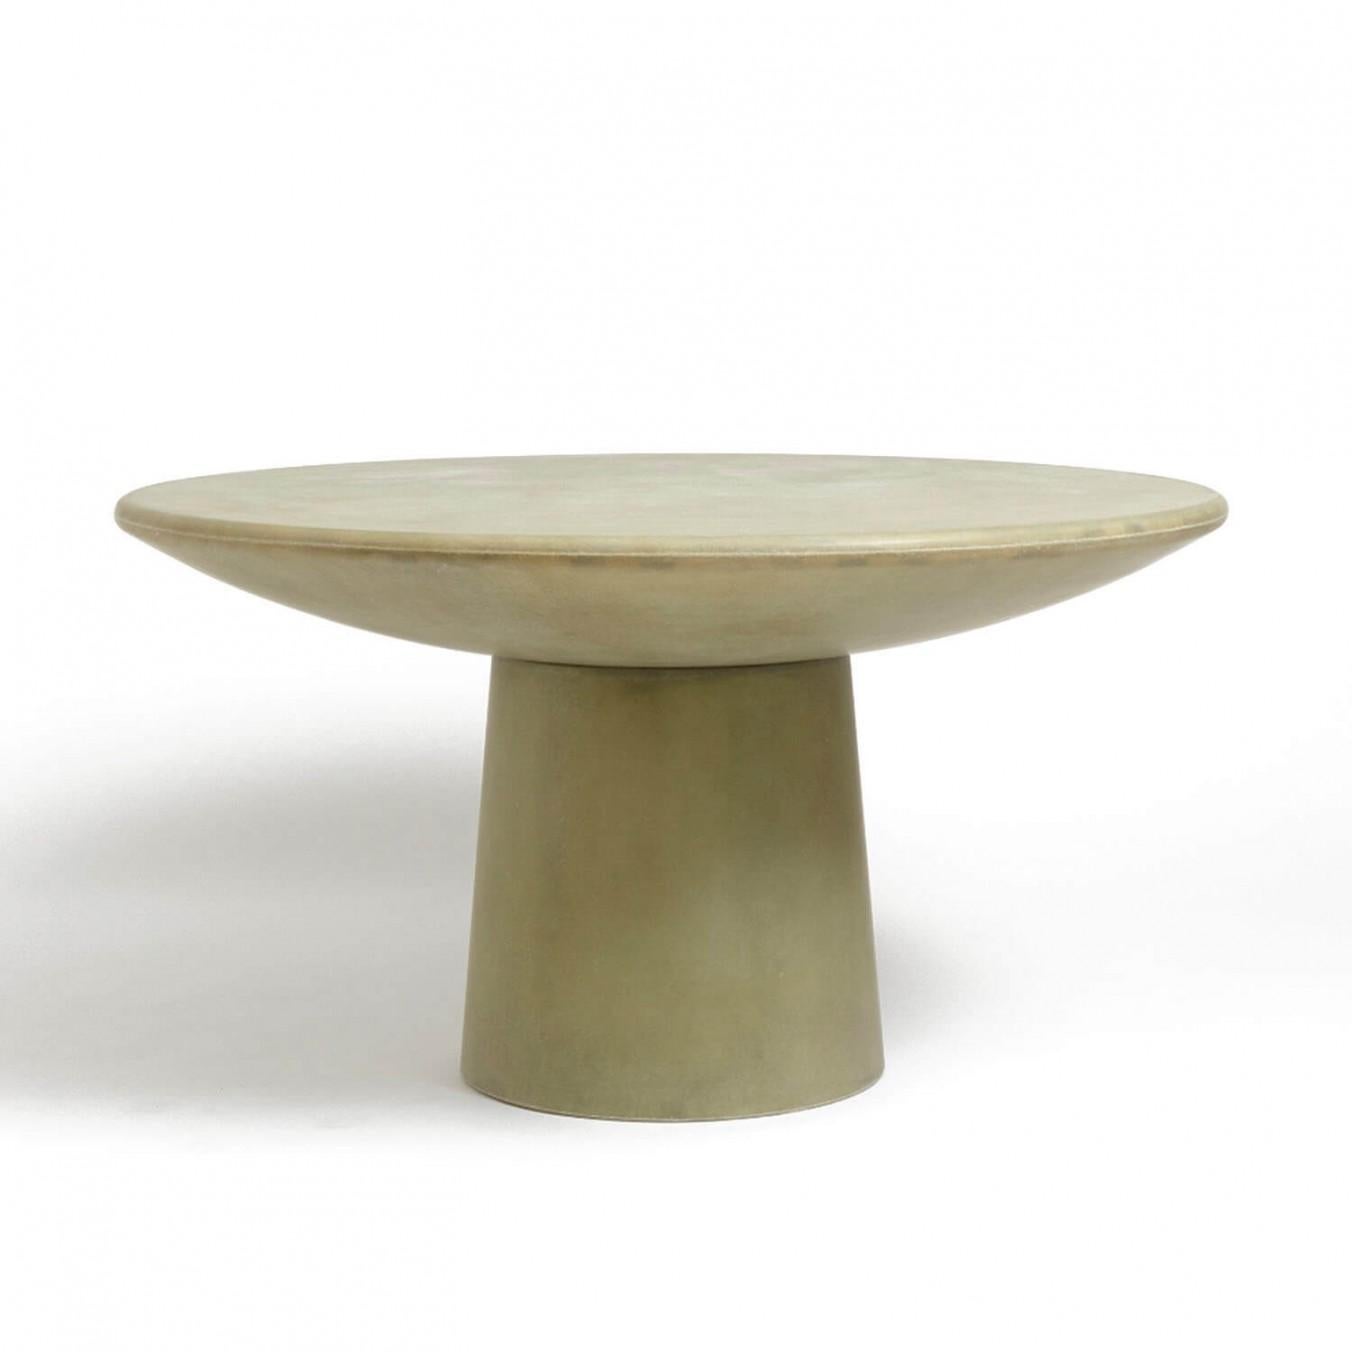 Contemporary fiberglass dining table - Roly Poly dining table by Faye Toogood. This is shown in the raw fiberglass finish. 
Design: Faye Toogood
Material: Fiberglass 
Available also in cream or charcoal finish

The Roly Poly chair is the anchor